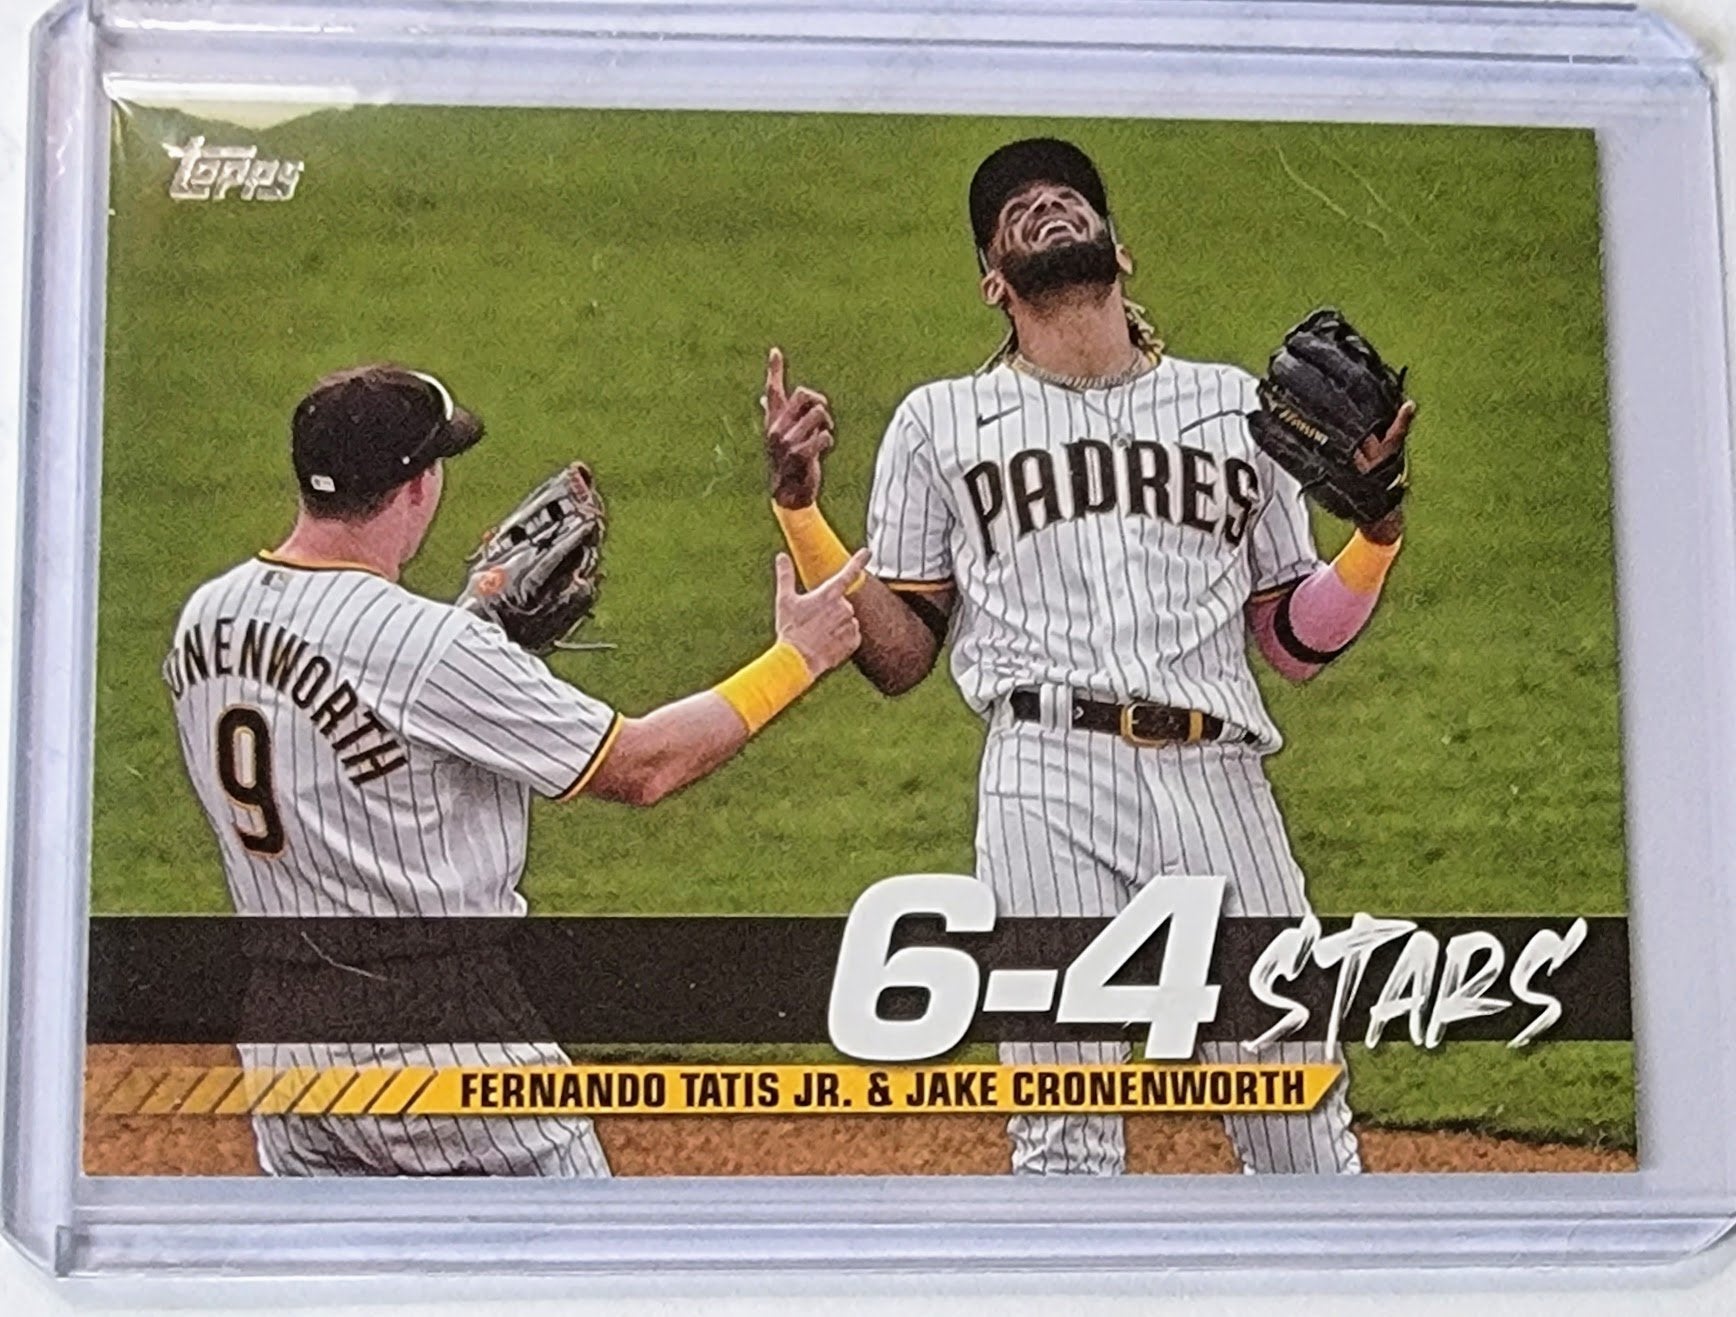 2022 Topps 6-4 Stars Tatis & Cronenworth Baseball Trading Card GRB1 simple Xclusive Collectibles   